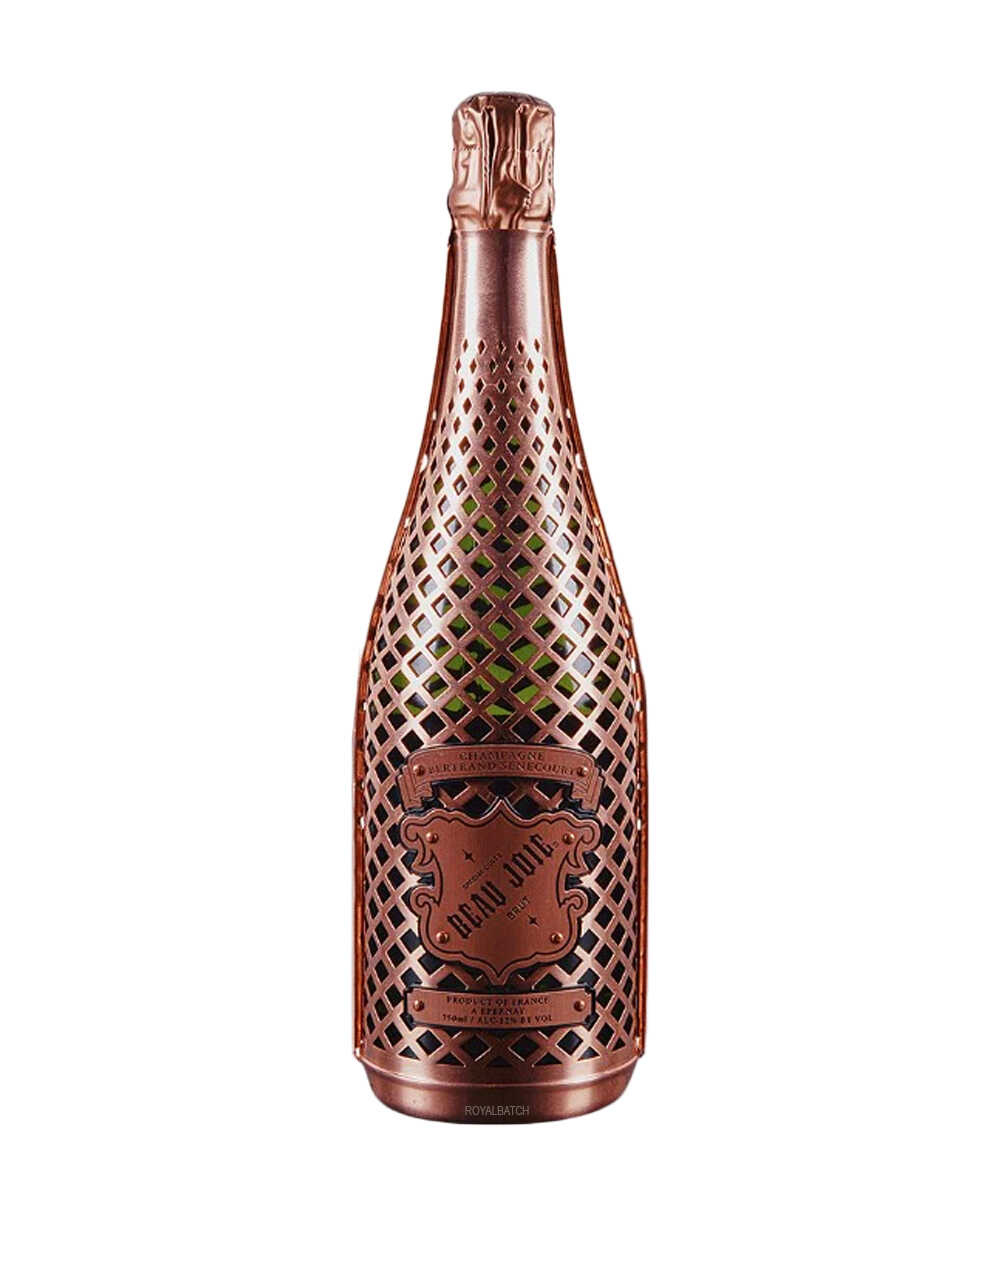 Beau Joie Brut Copper Cage Champagne